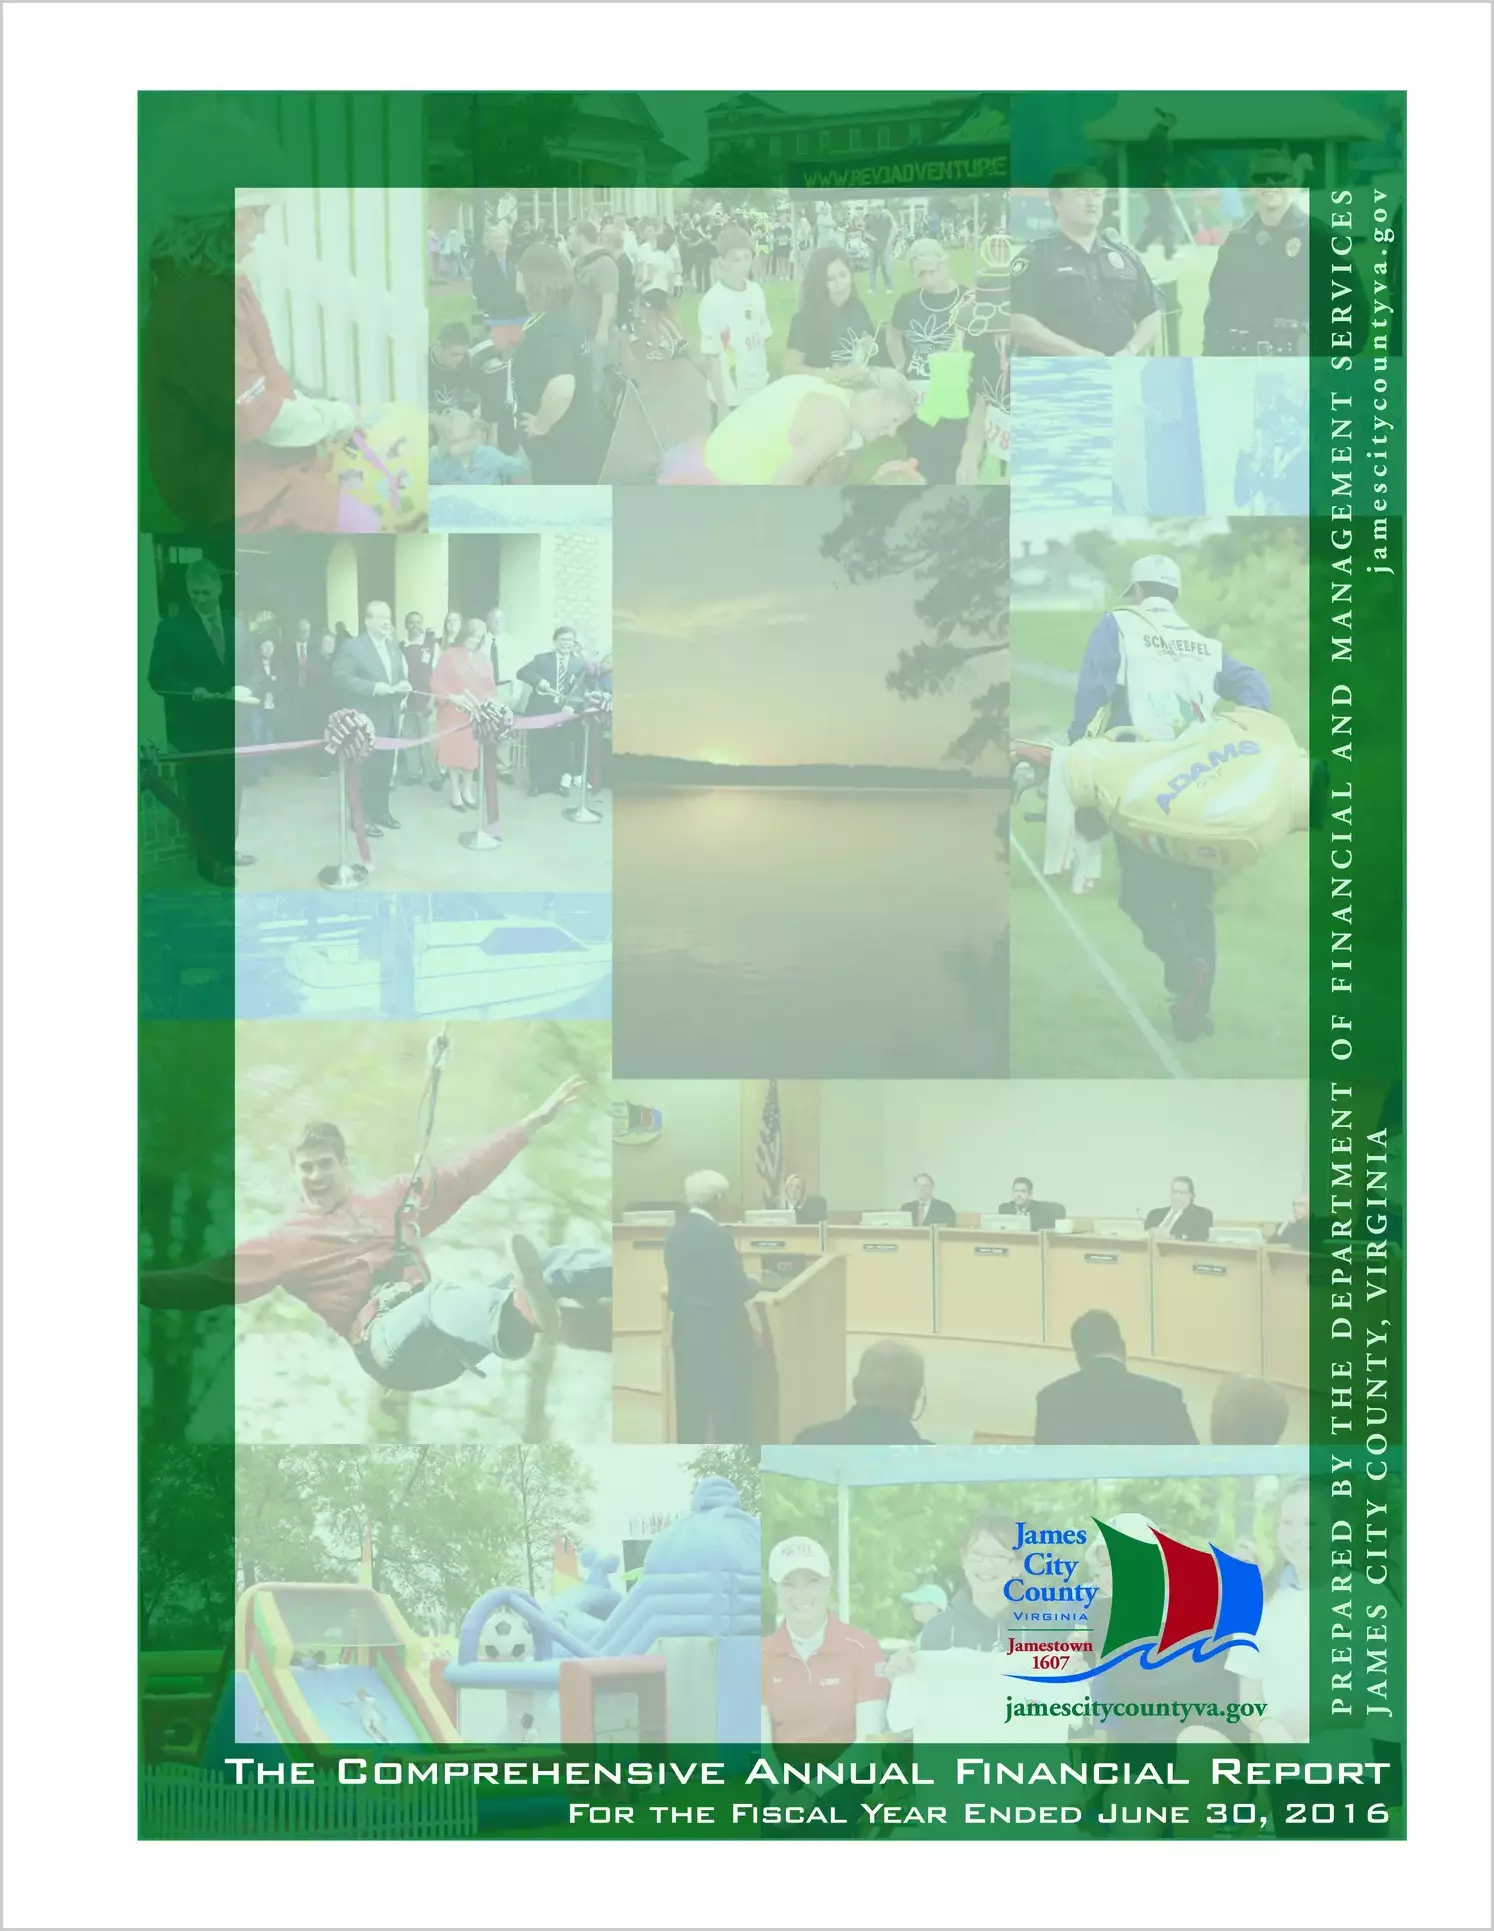 2016 Annual Financial Report for County of James City